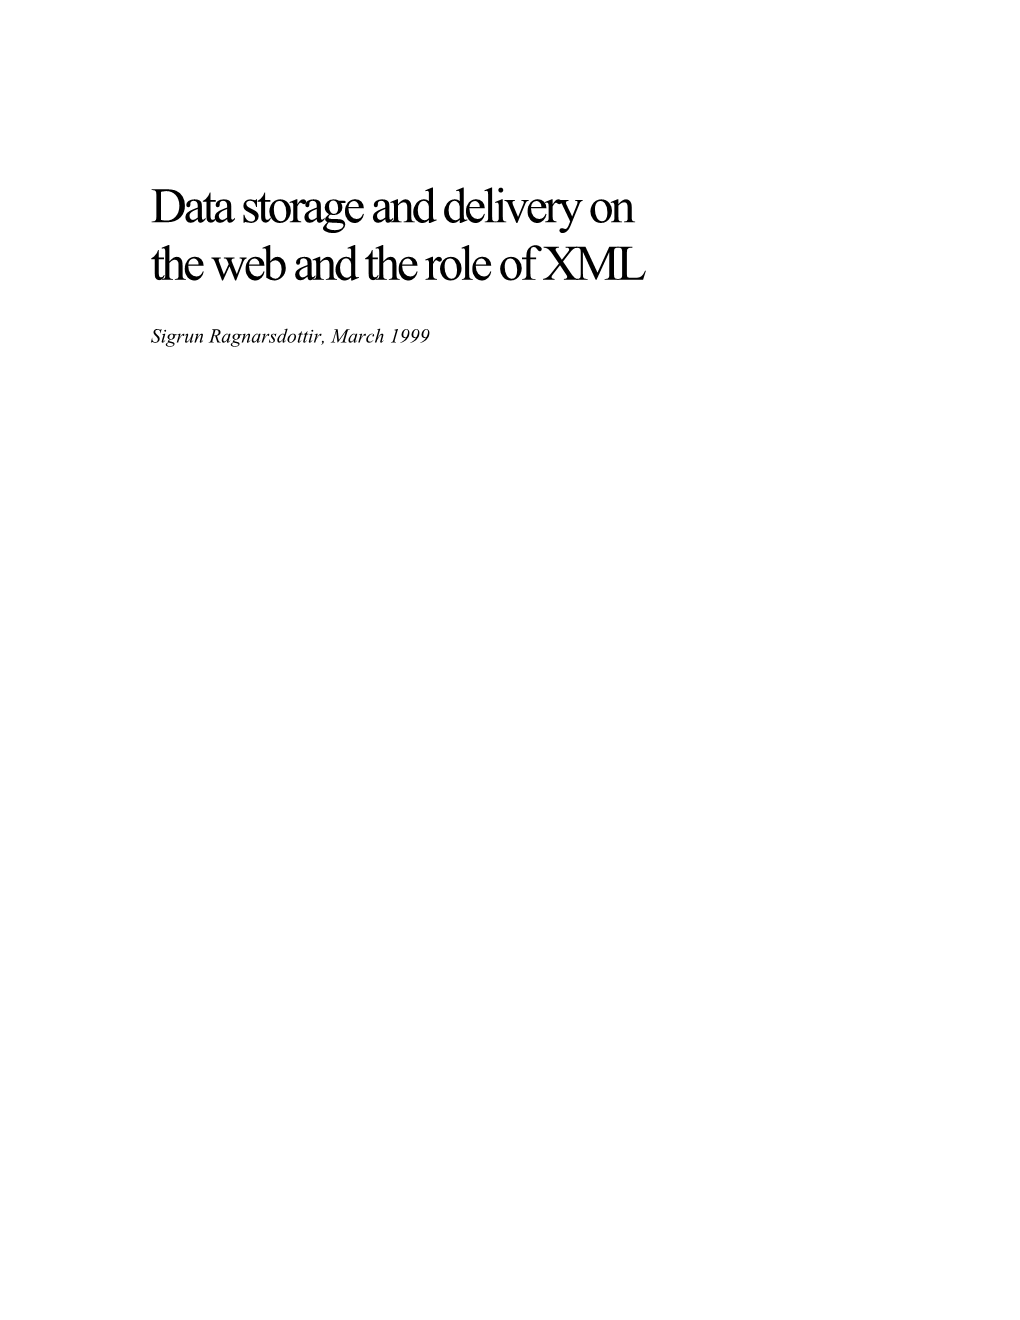 Data Storage and Delivery on the Web and the Role of XML